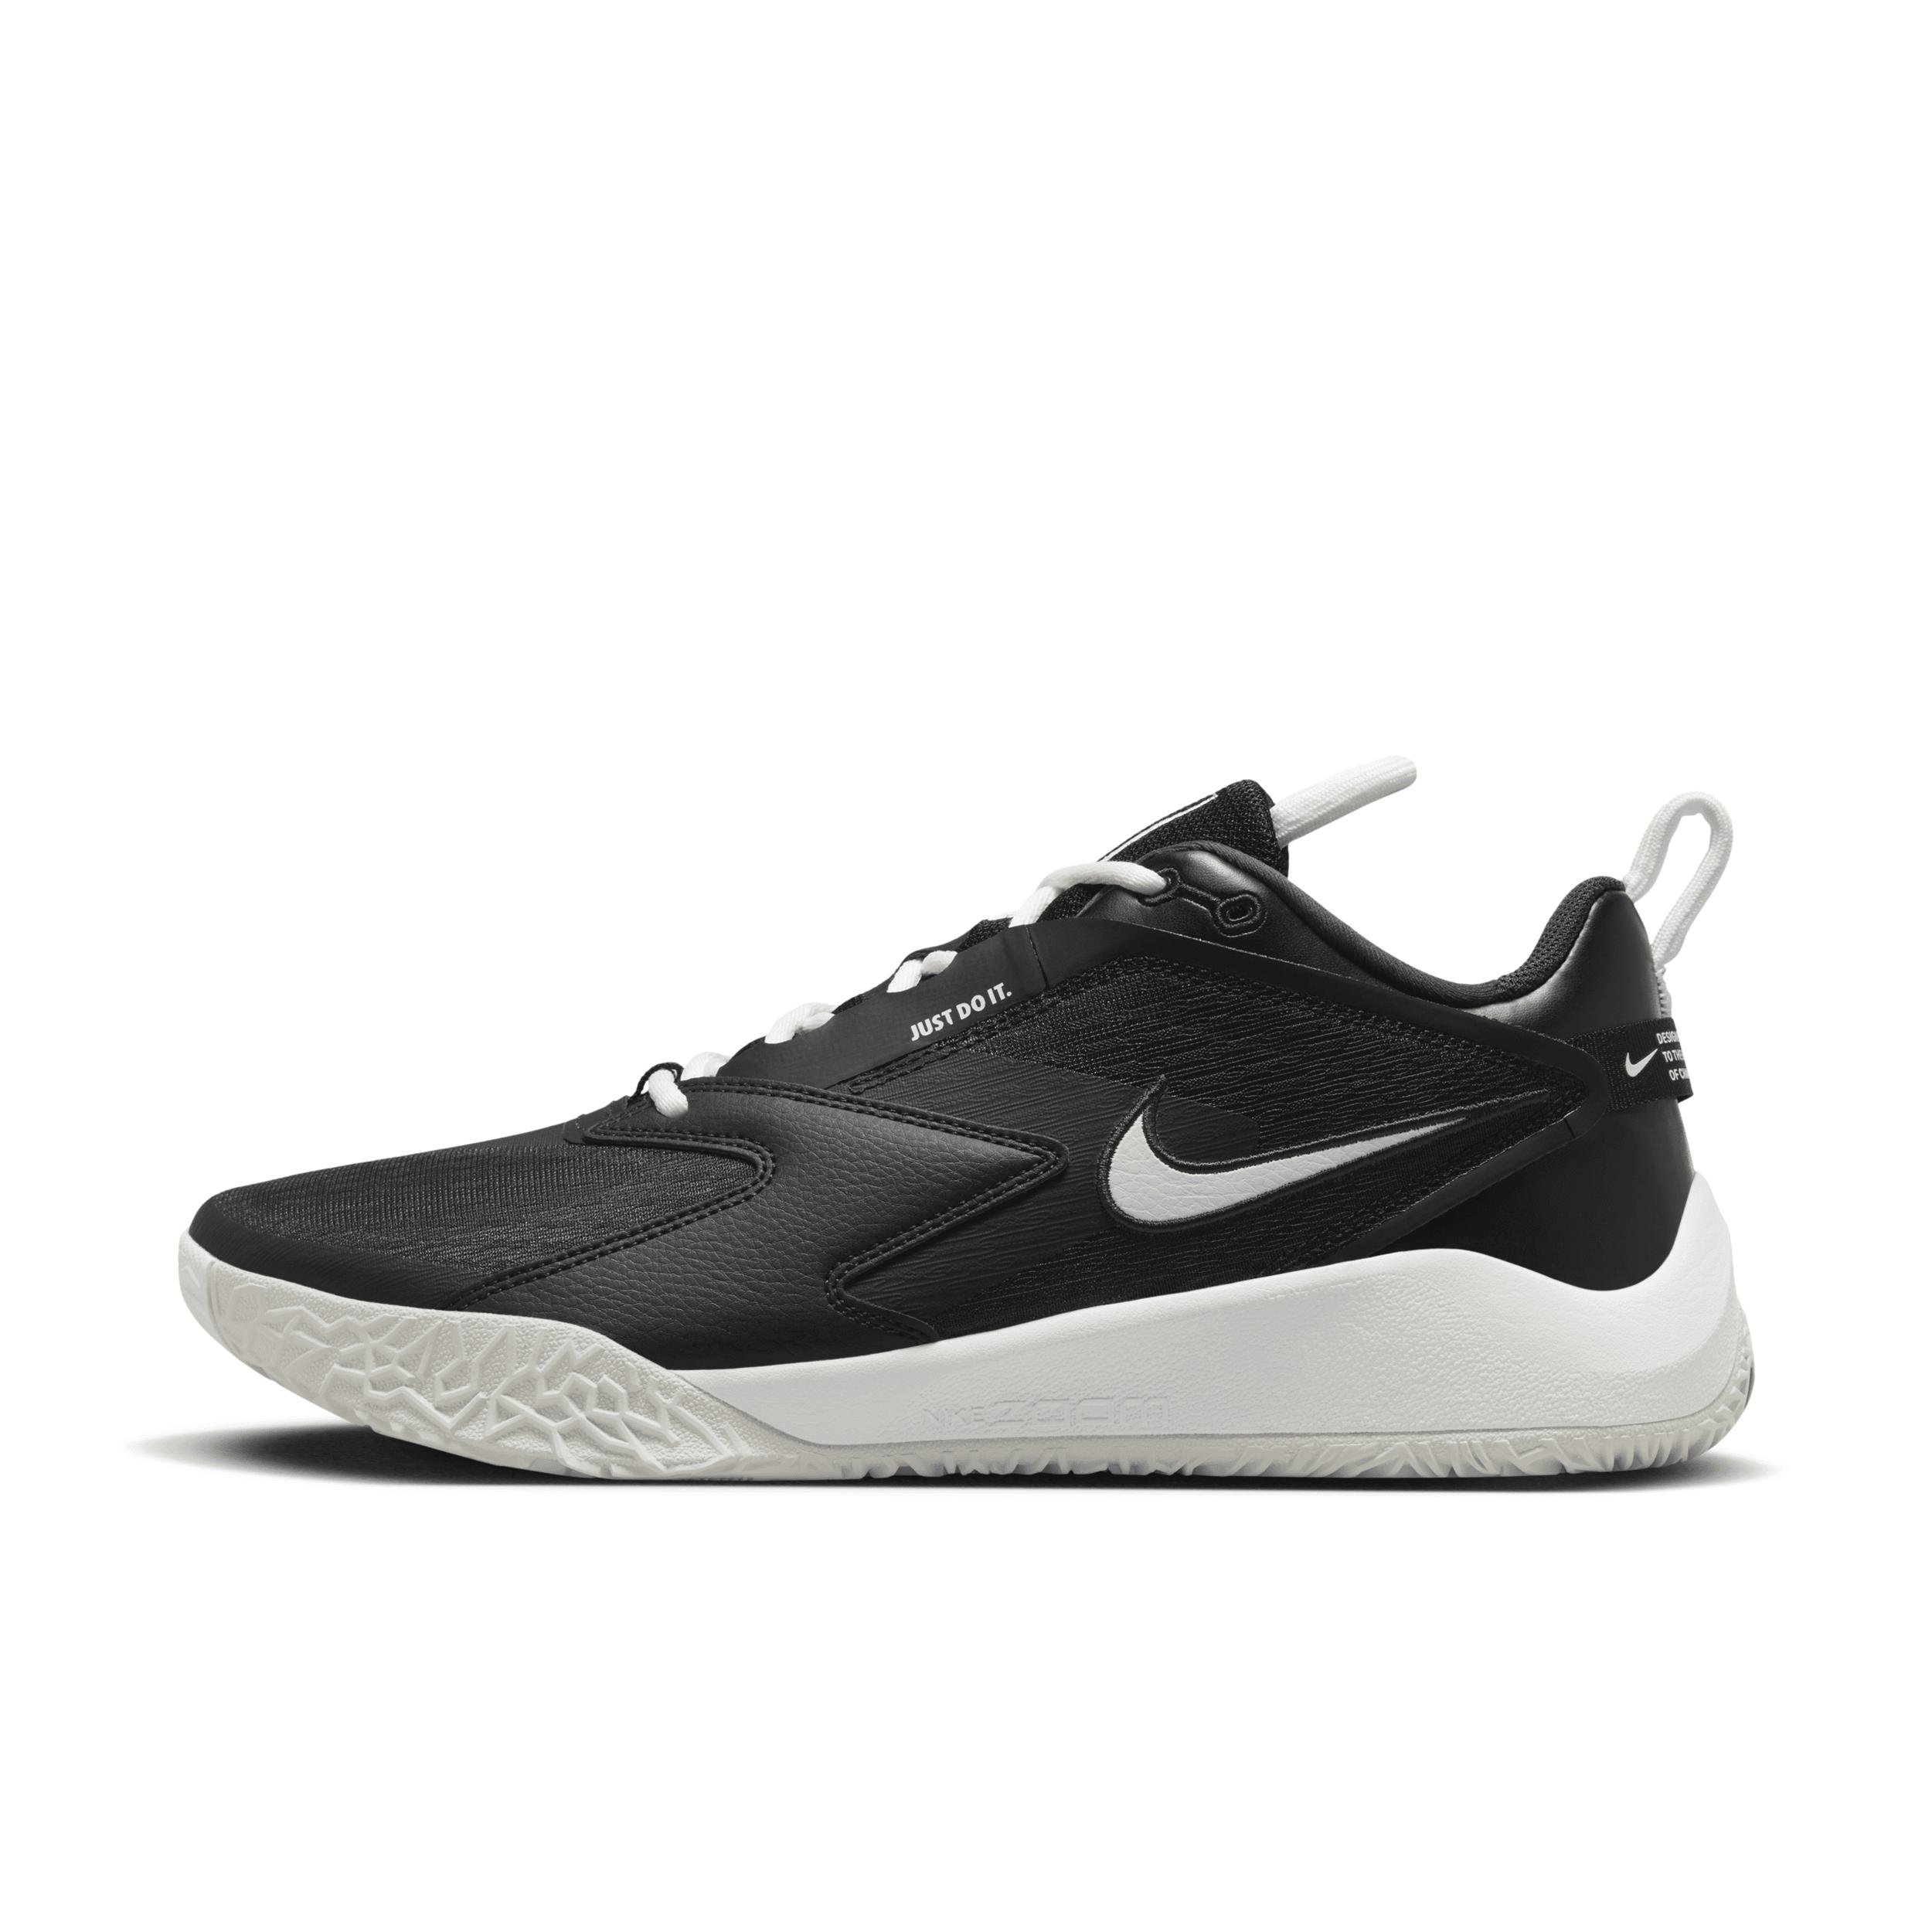 Nike Unisex HyperAce 3 Volleyball Shoes by NIKE